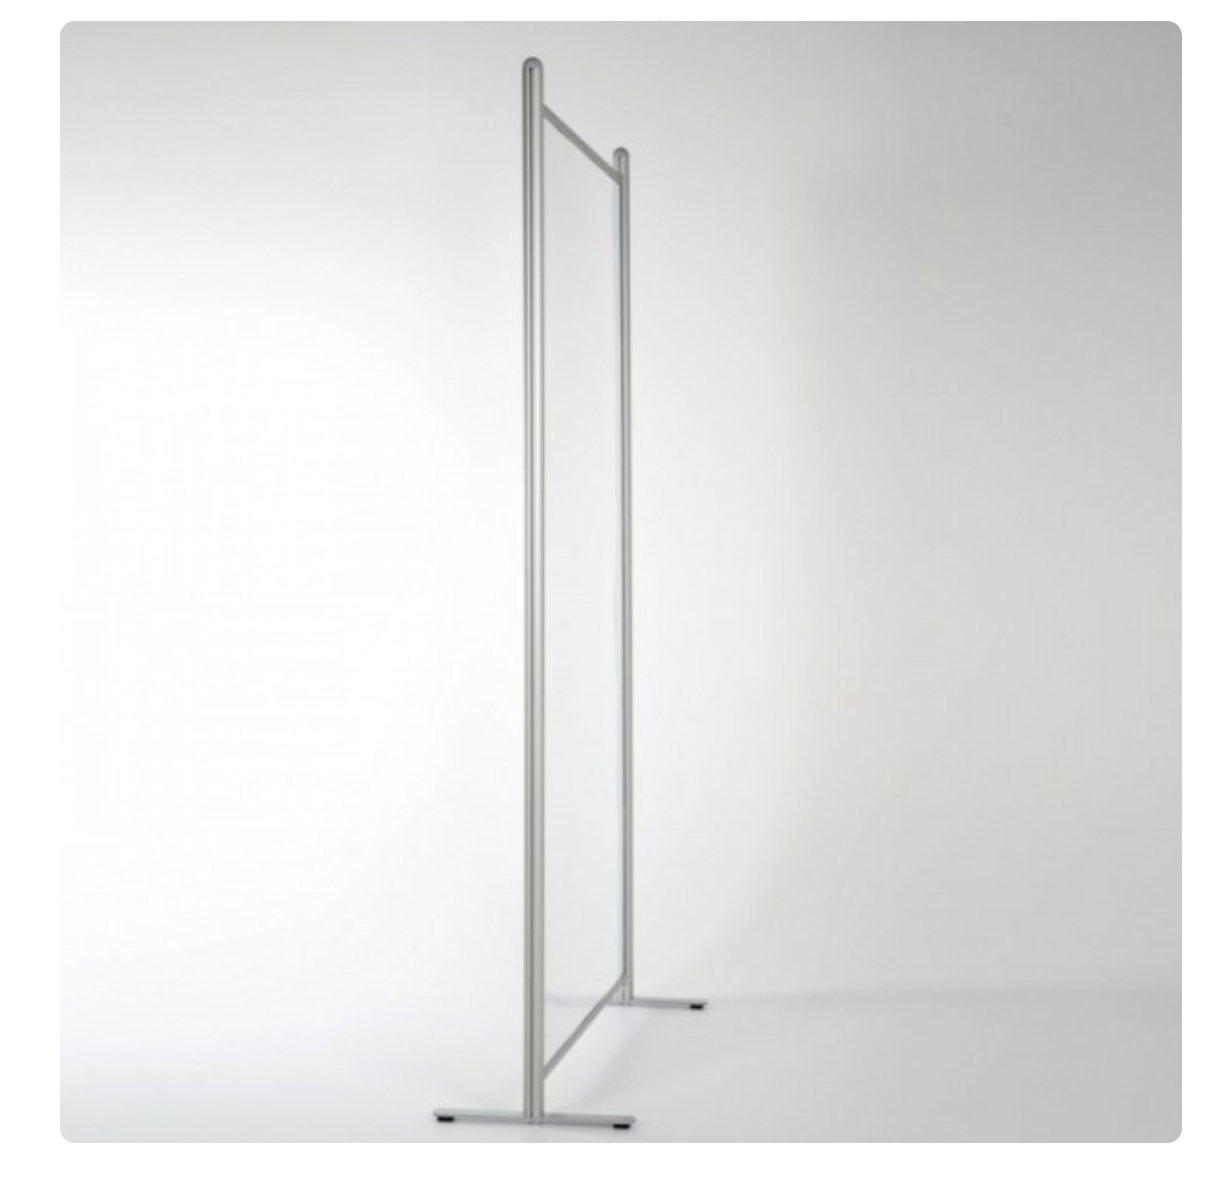 Affordable Floorstanding mobile Acrylic Screen with Aluminium frame and feet with optional castors 1220 wide - 1784 high or 1950 h